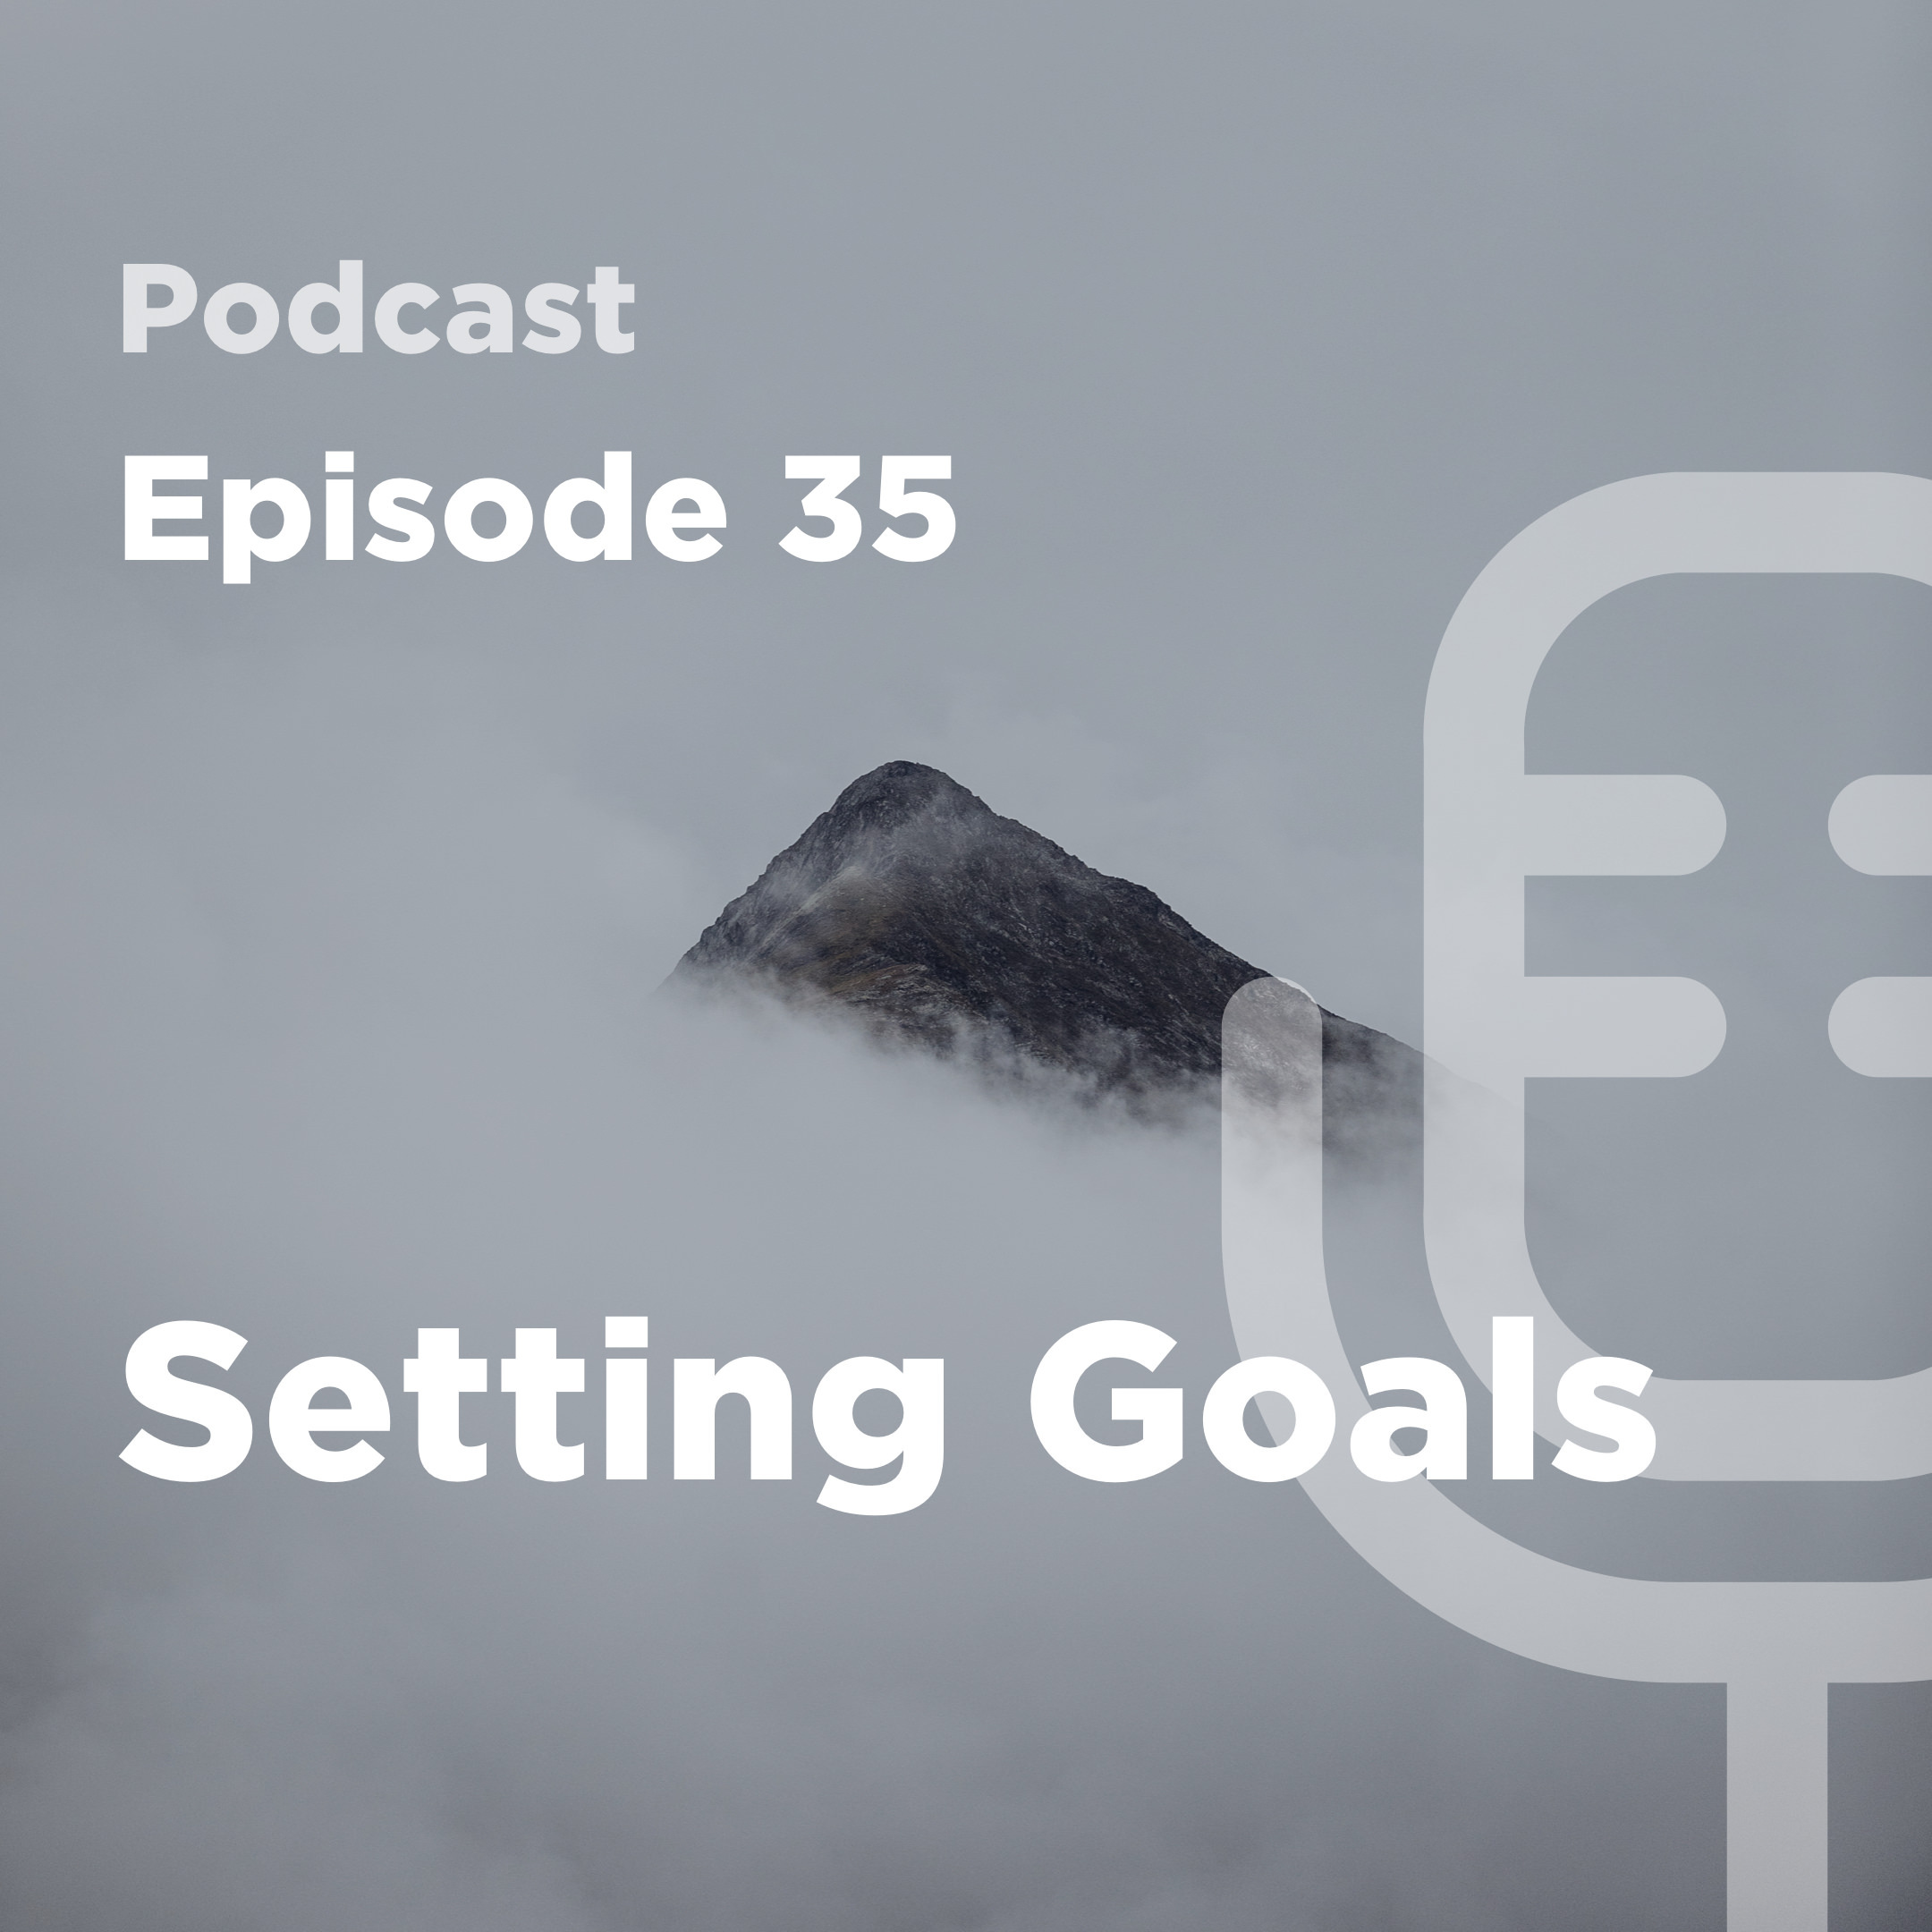 Beter Worden Podcast - Setting Goals - Join Cycling app